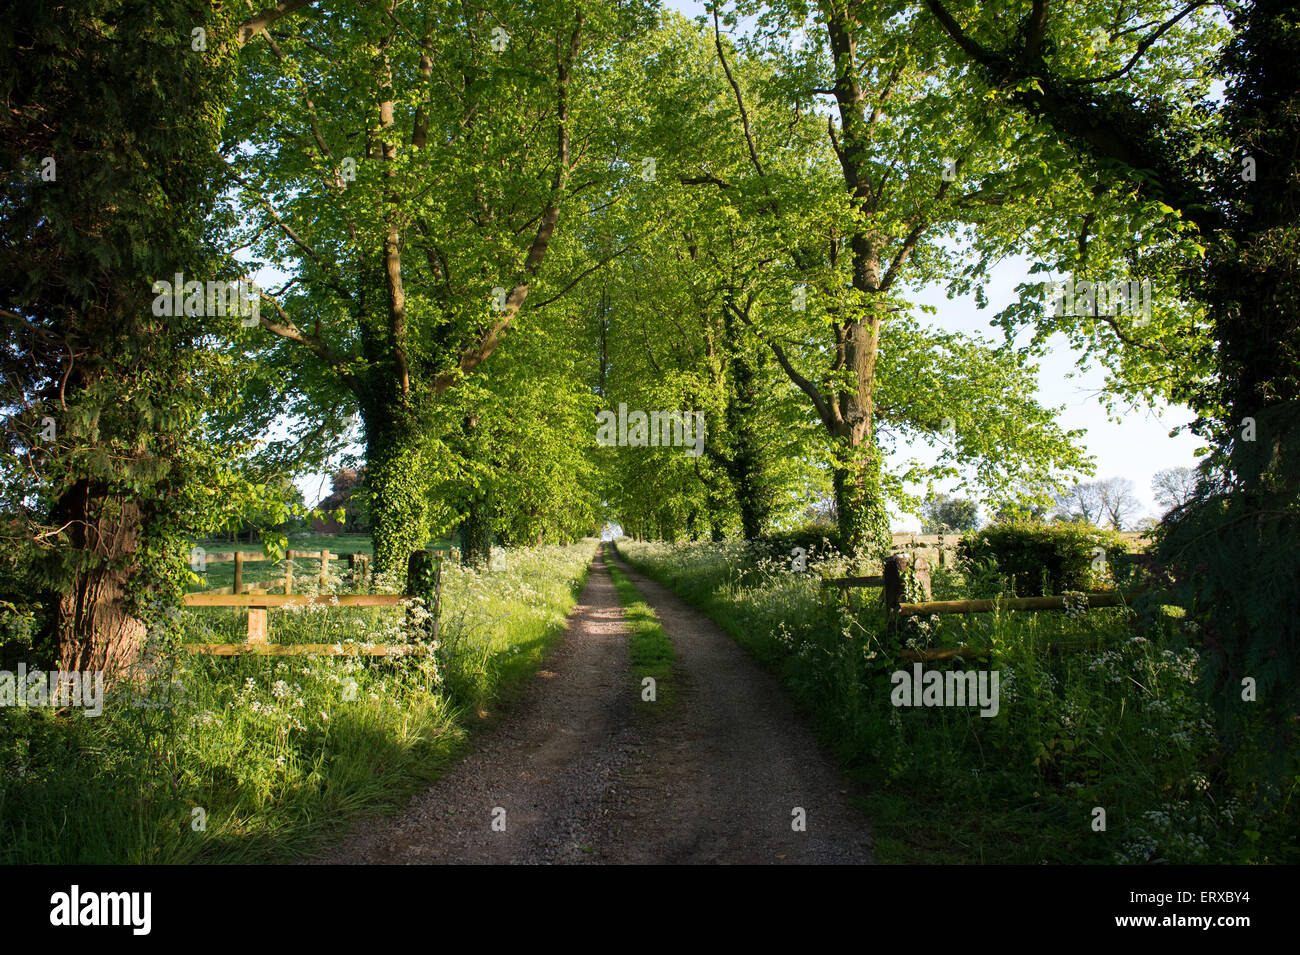 Rural English country road through trees in spring. Oxfordshire. UK Stock Photo